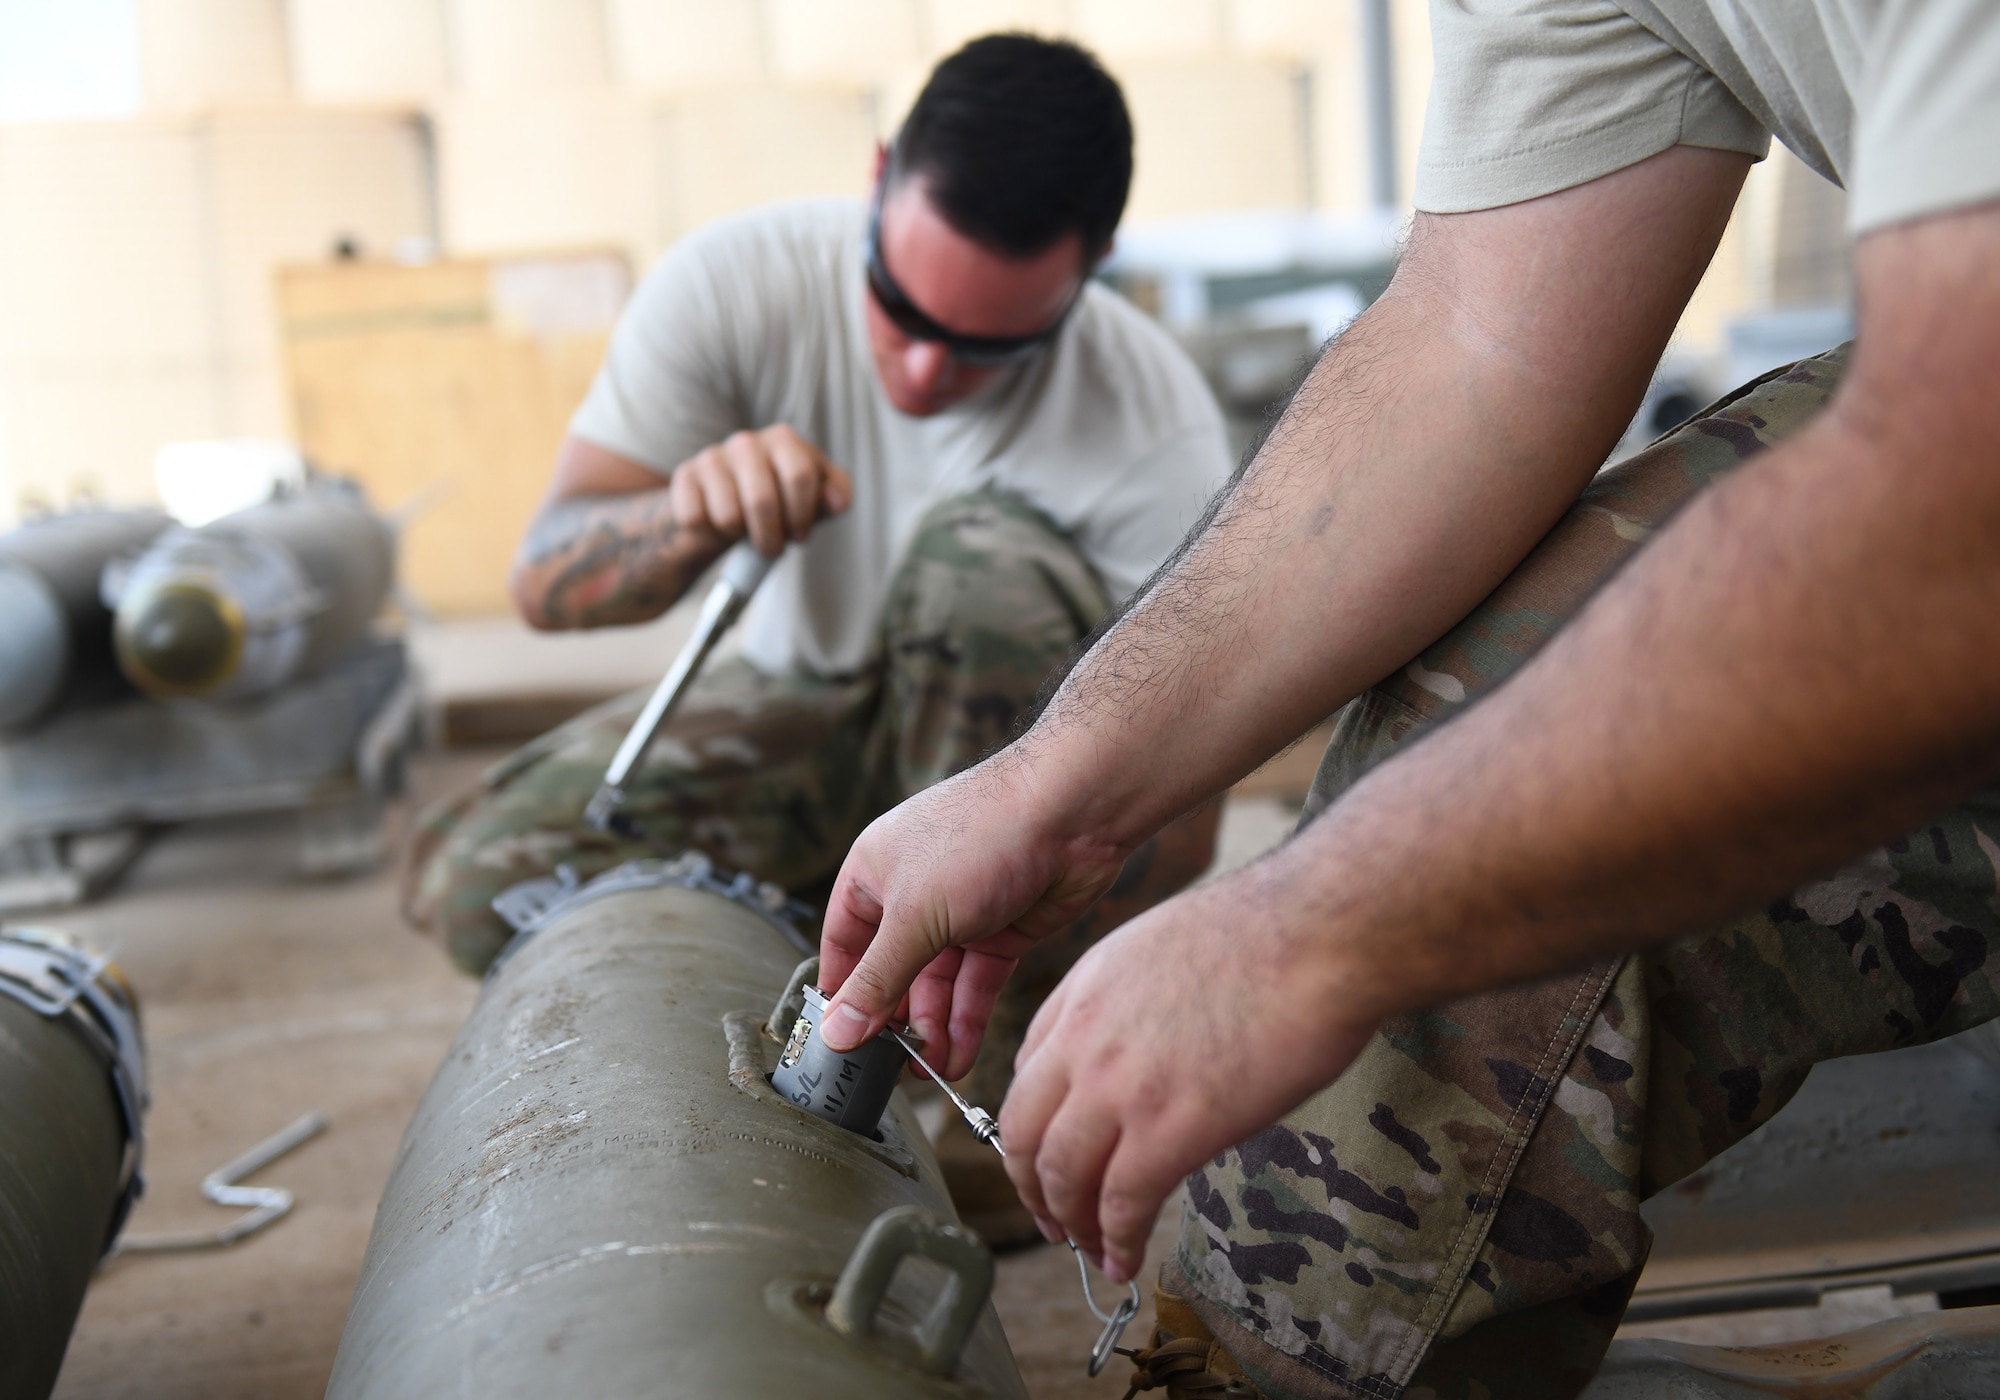 U.S. Air Force munitions Airmen assigned to the 726th Expeditionary Air Base Squadron assemble munitions during a bomb build at Chabelley Airfield, Djibouti, Nov. 12, 2019. The 726th EABS Munitions Systems Airmen build, inspect and store all munitions at the airfield, ensuring mission effectiveness at a moment’s notice. (U.S. Air Force photo by Staff Sgt. Alex Fox Echols III)